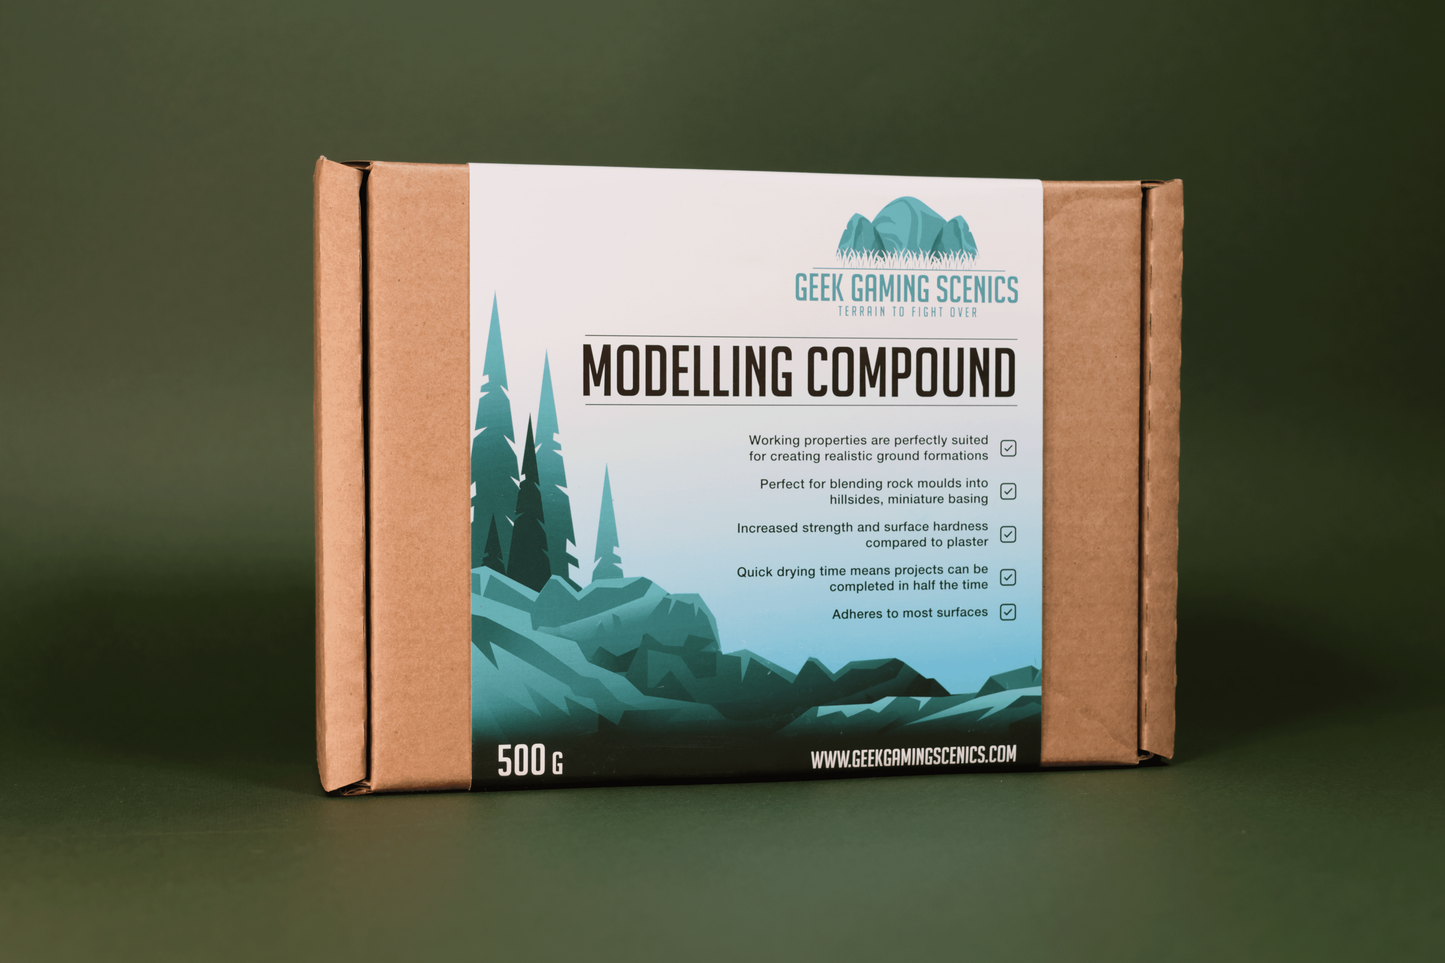 Modelling Compound Small 500g